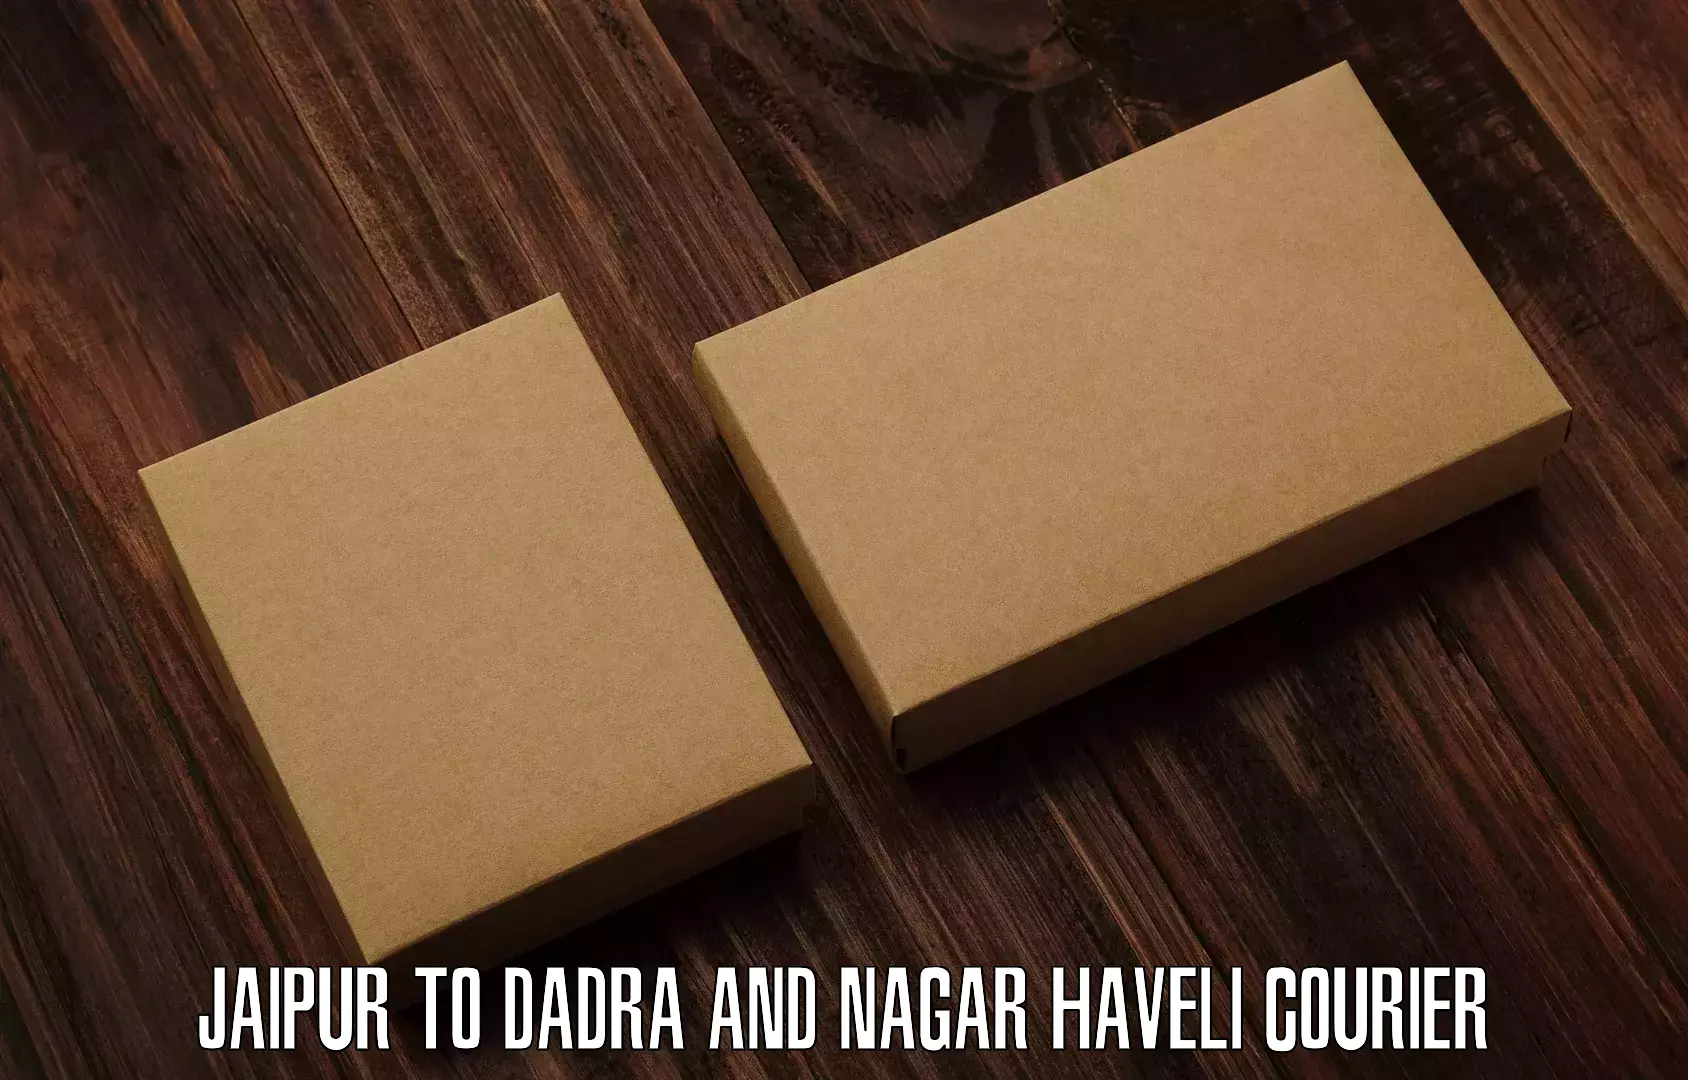 End-to-end delivery Jaipur to Dadra and Nagar Haveli